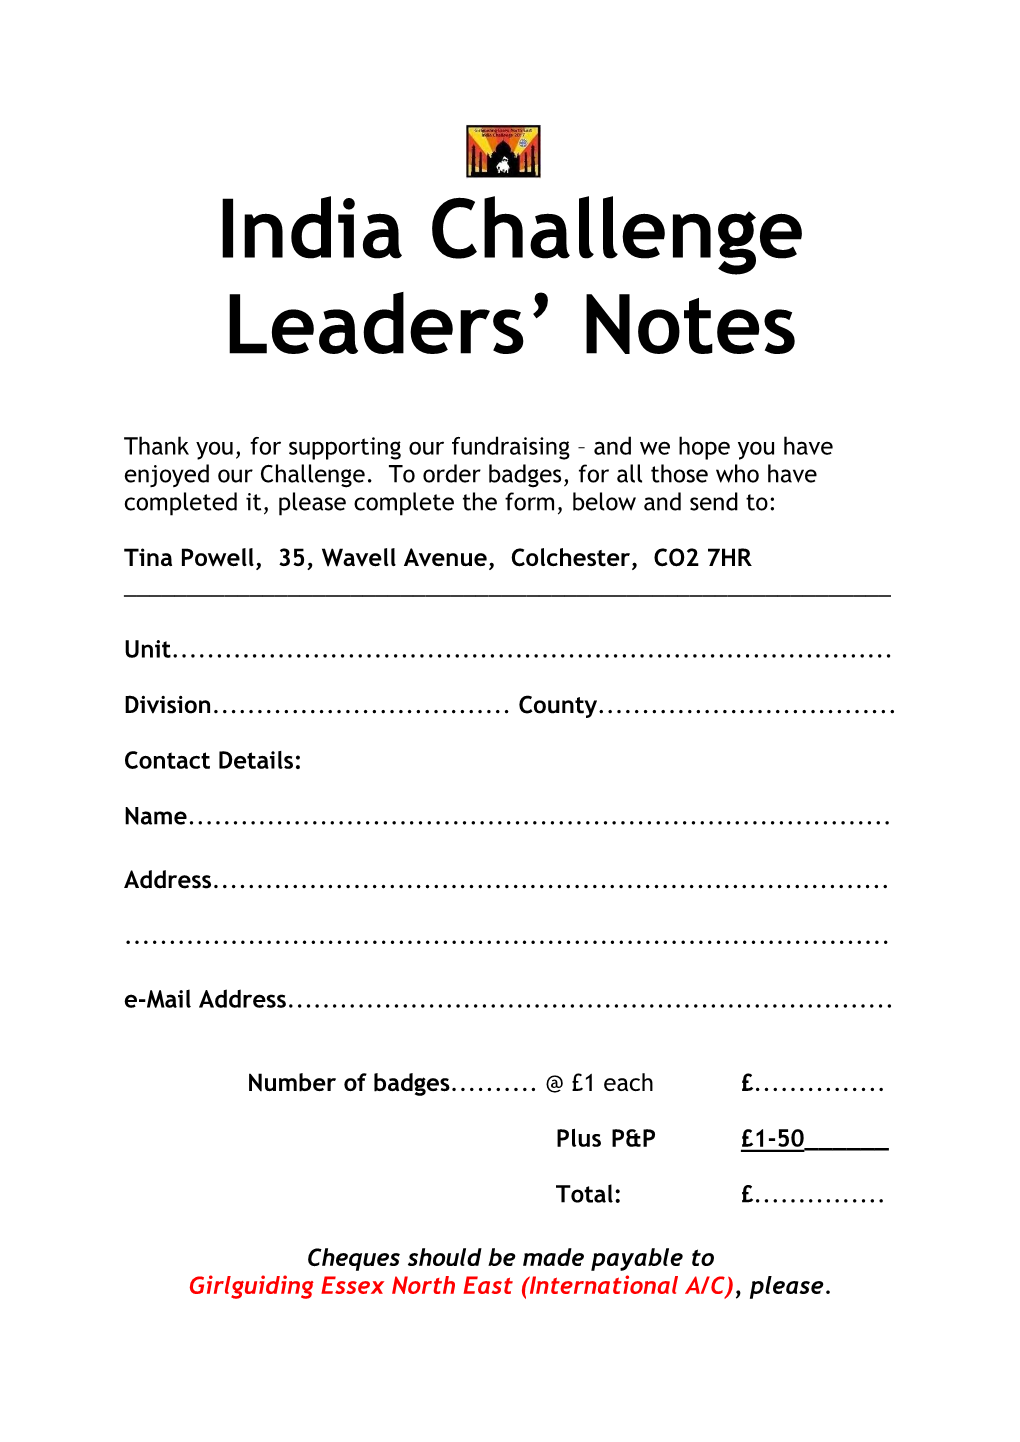 India Challenge Leaders' Notes